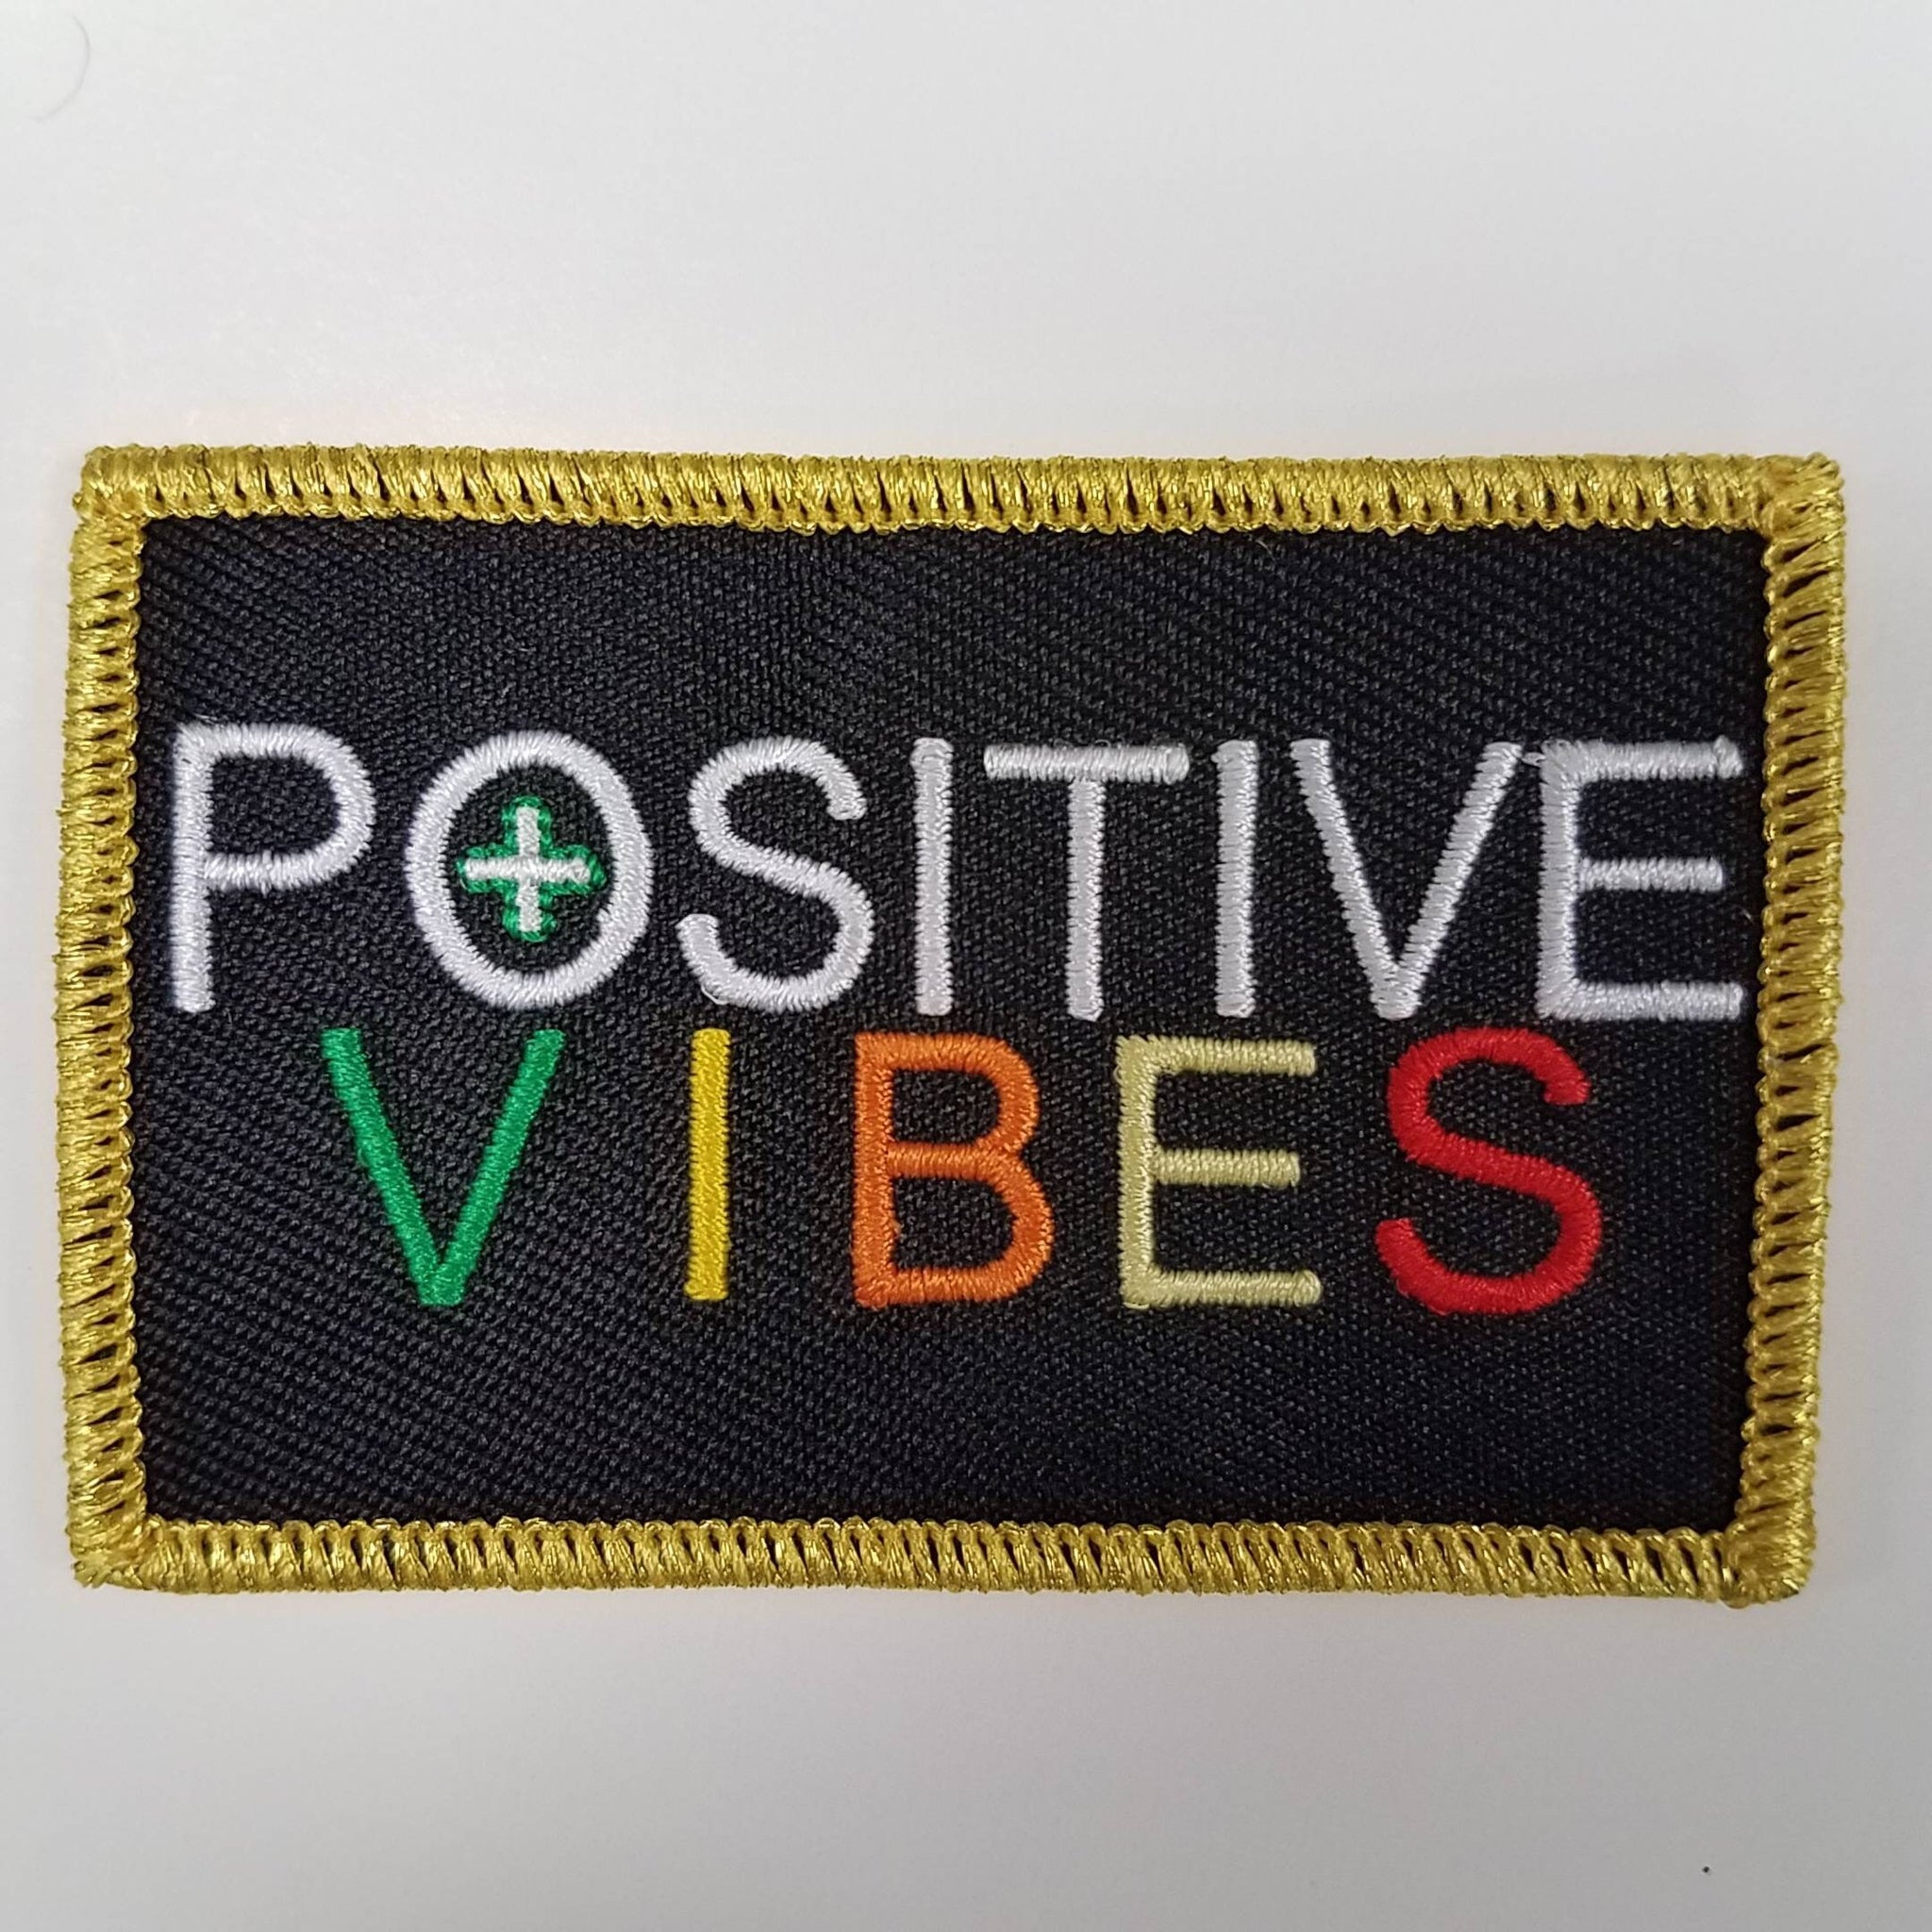 Motivational Emblem "Positive Vibes" Colorful Patch with Metallic Gold Thread, Iron-on Embroidered Patch; Size 3"x2"